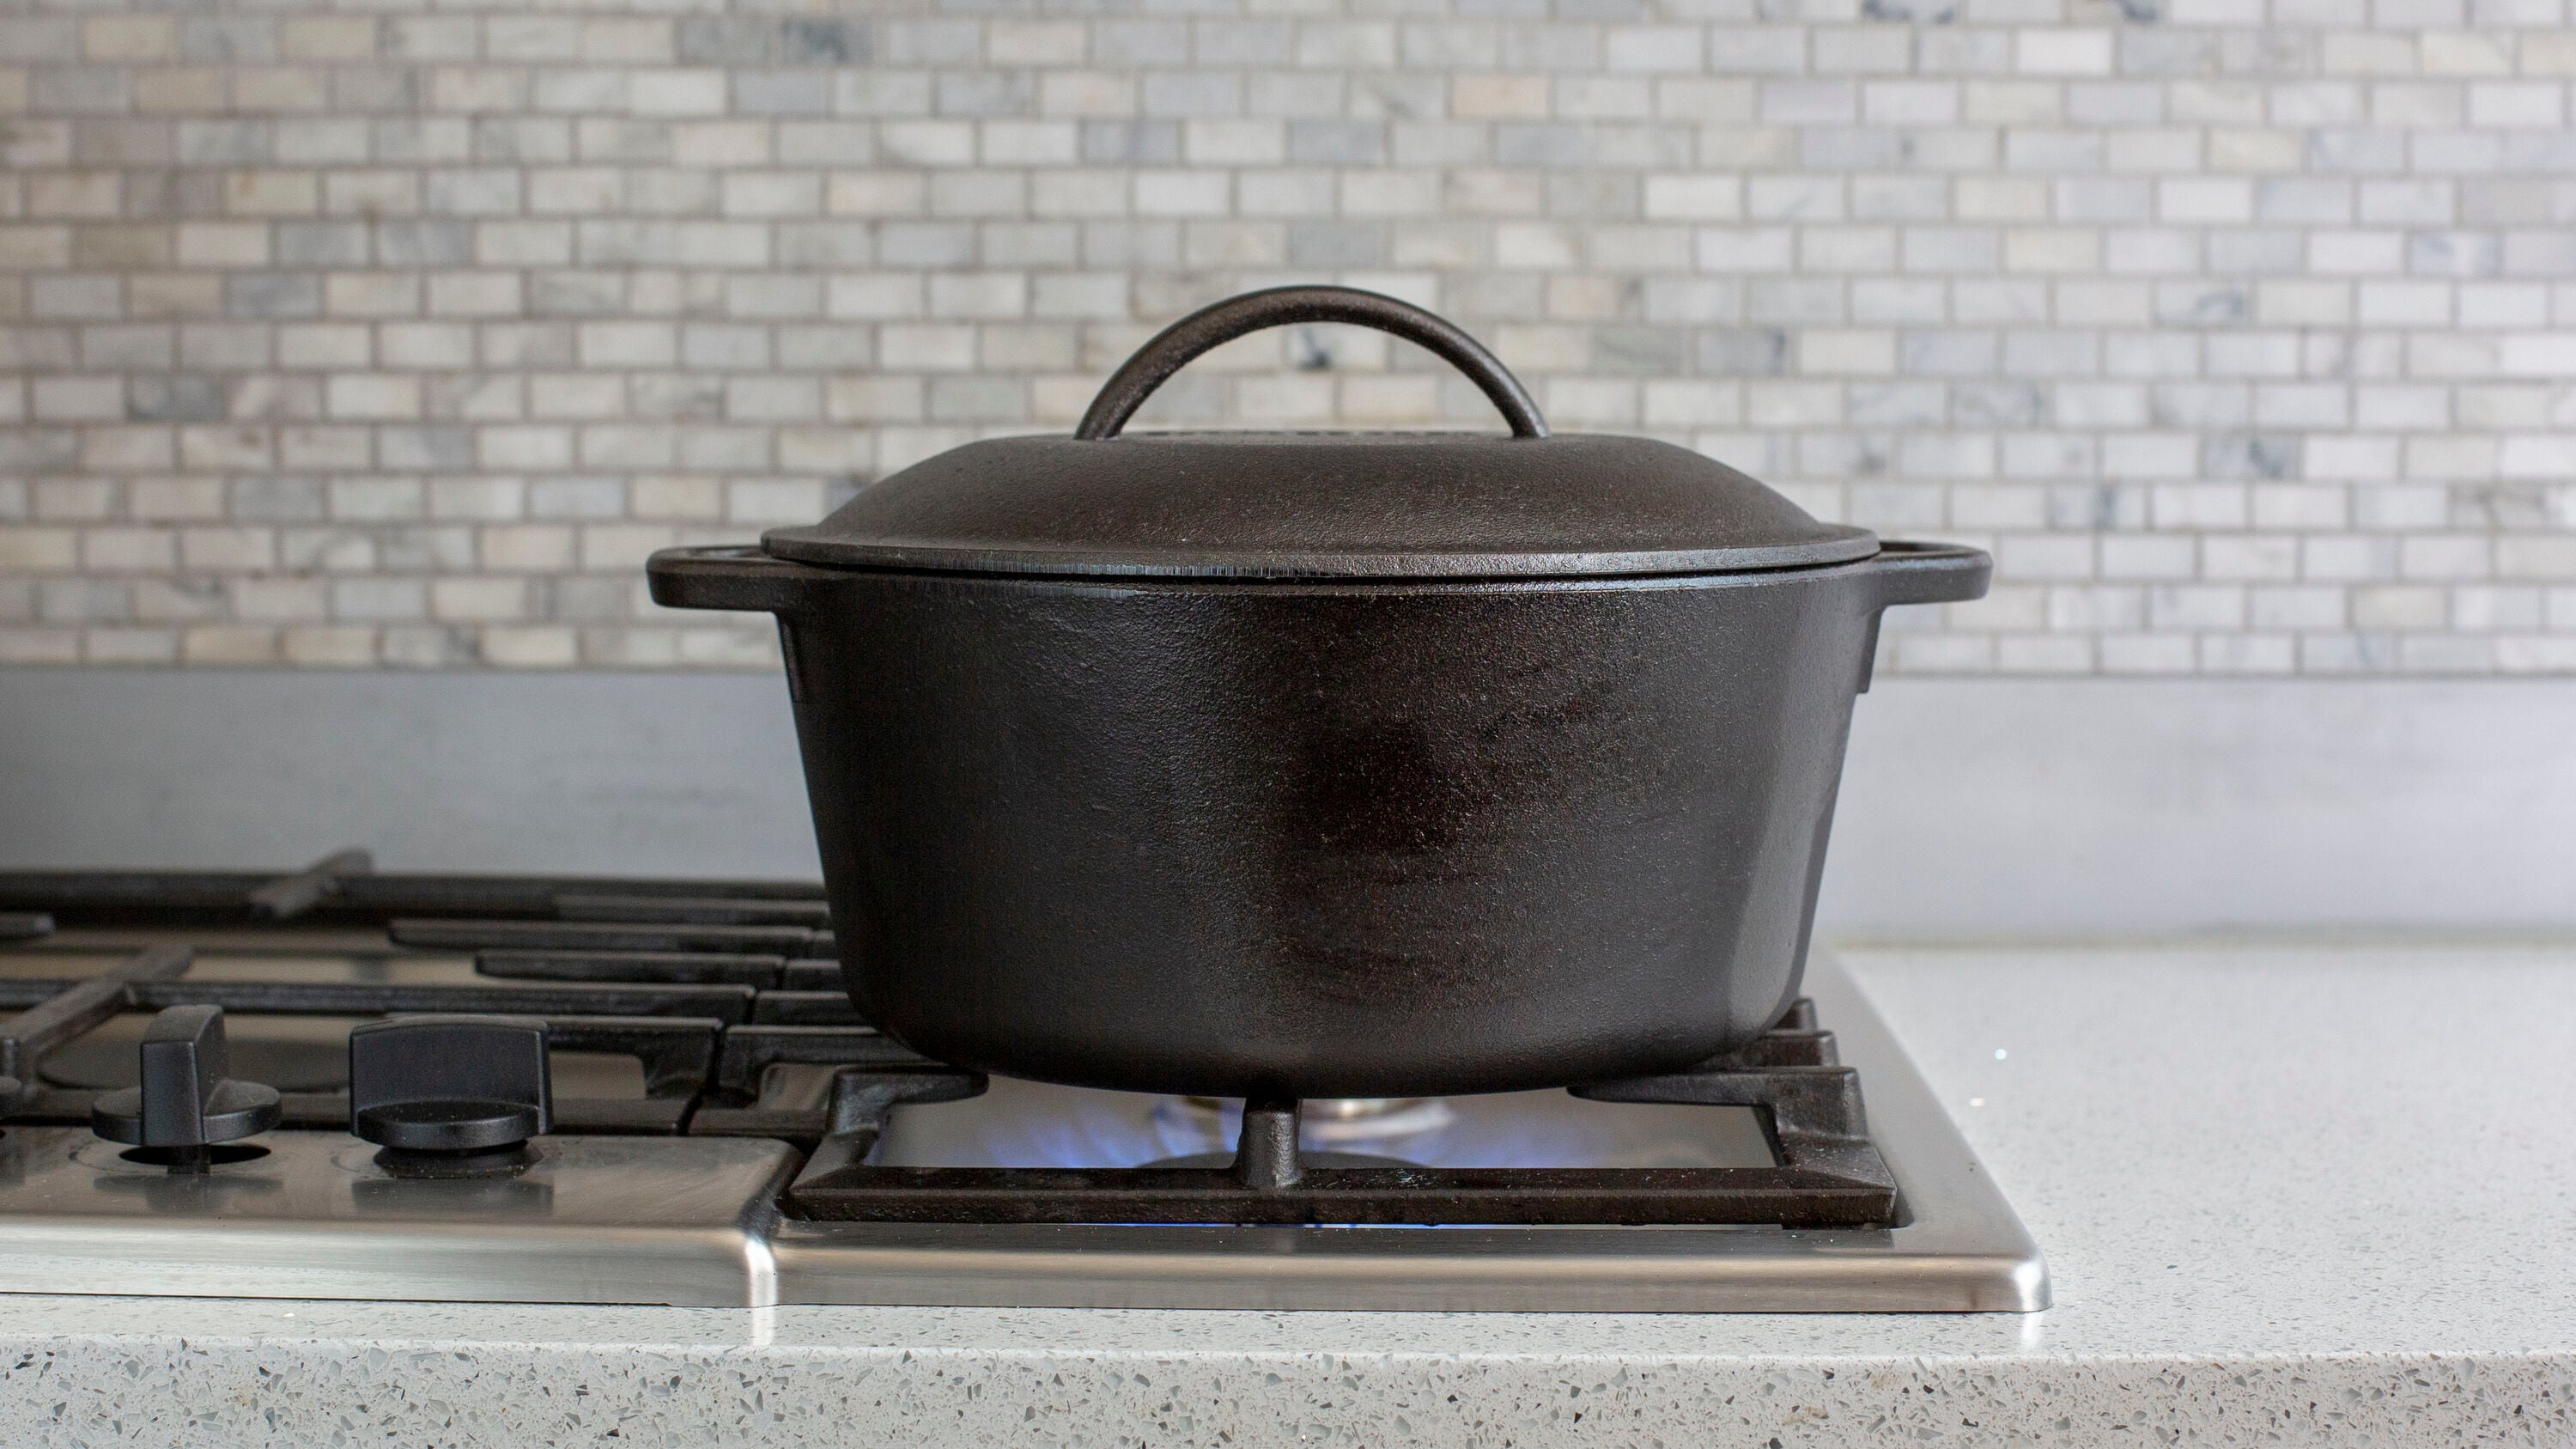 Lodge makes some of the best cast iron Dutch ovens, now starting at $50  lows (Up to 50% off)